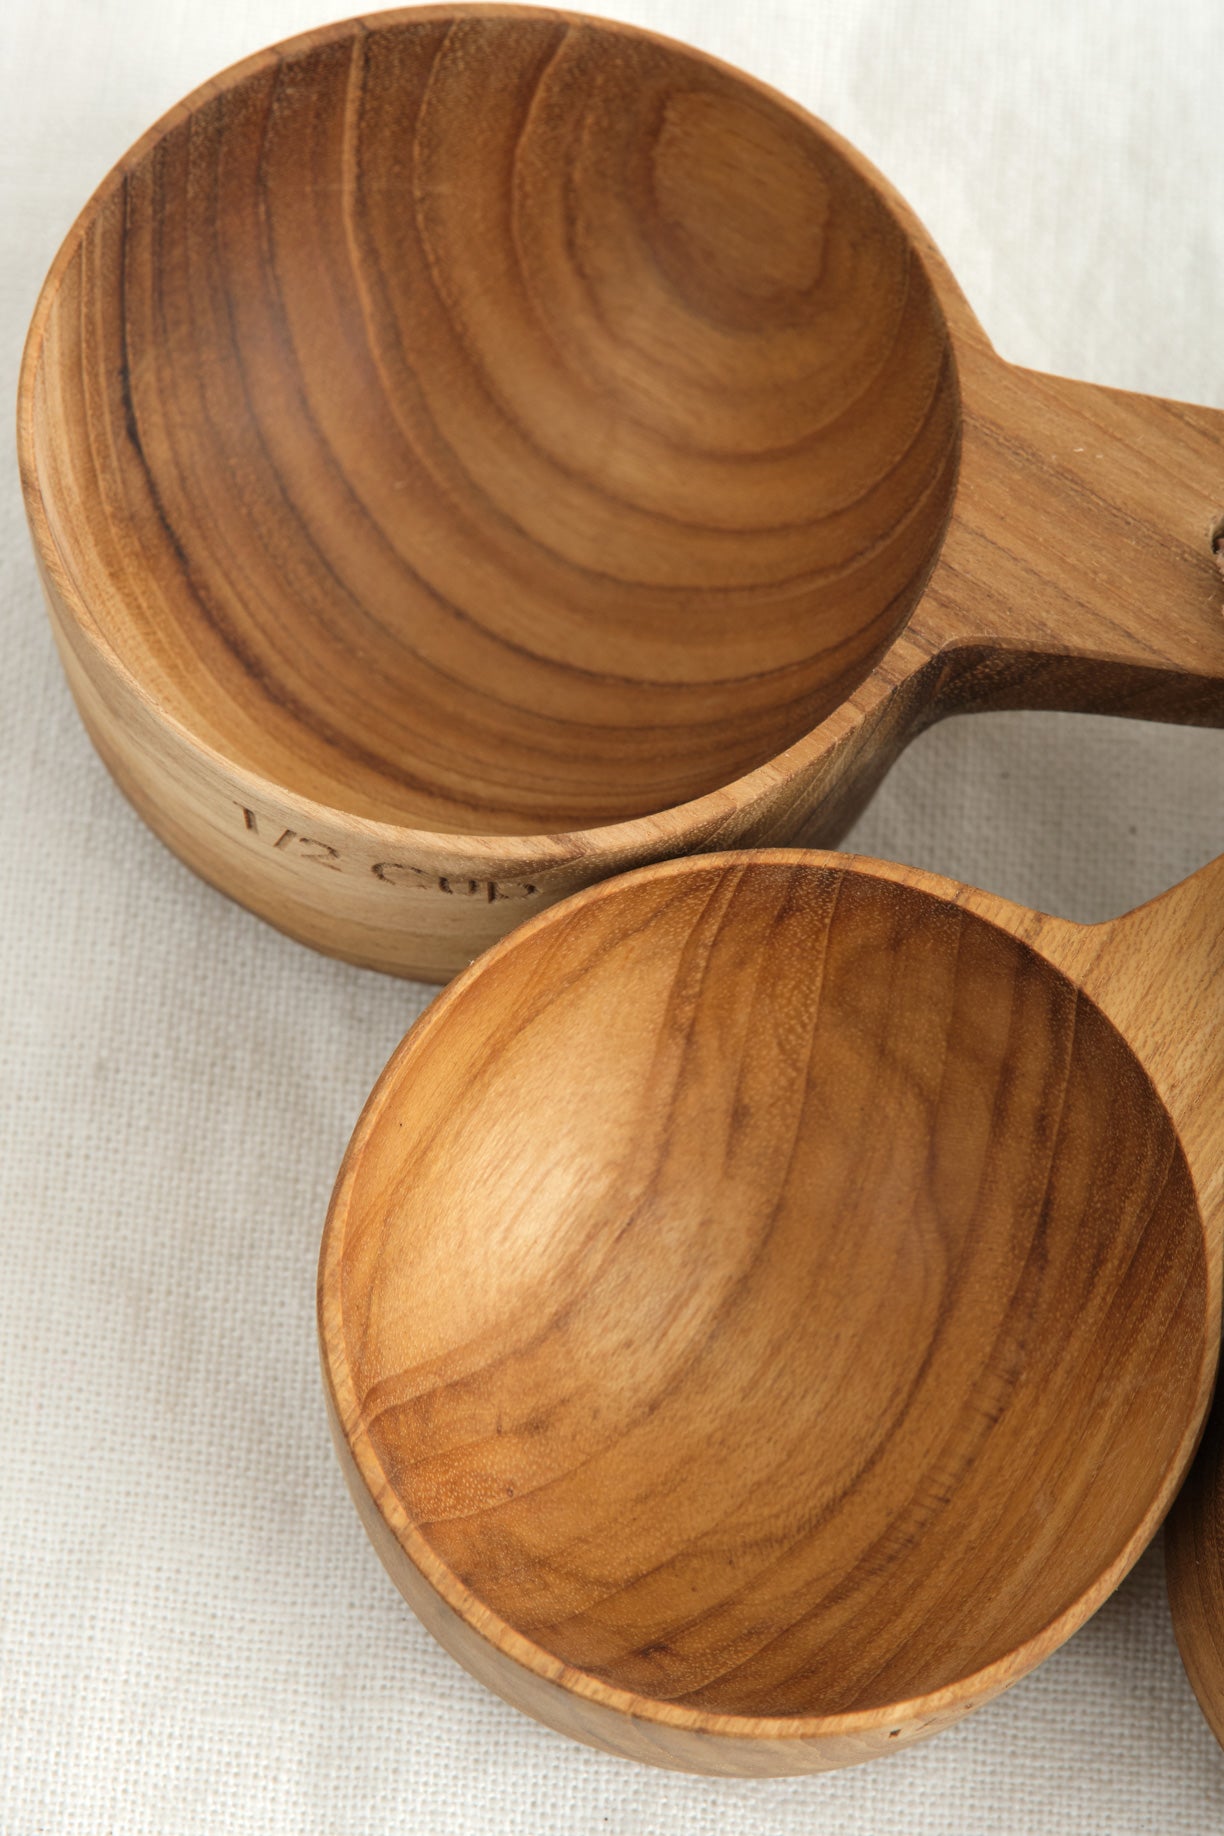 Be Home Wooden Measuring Cups w/Handle